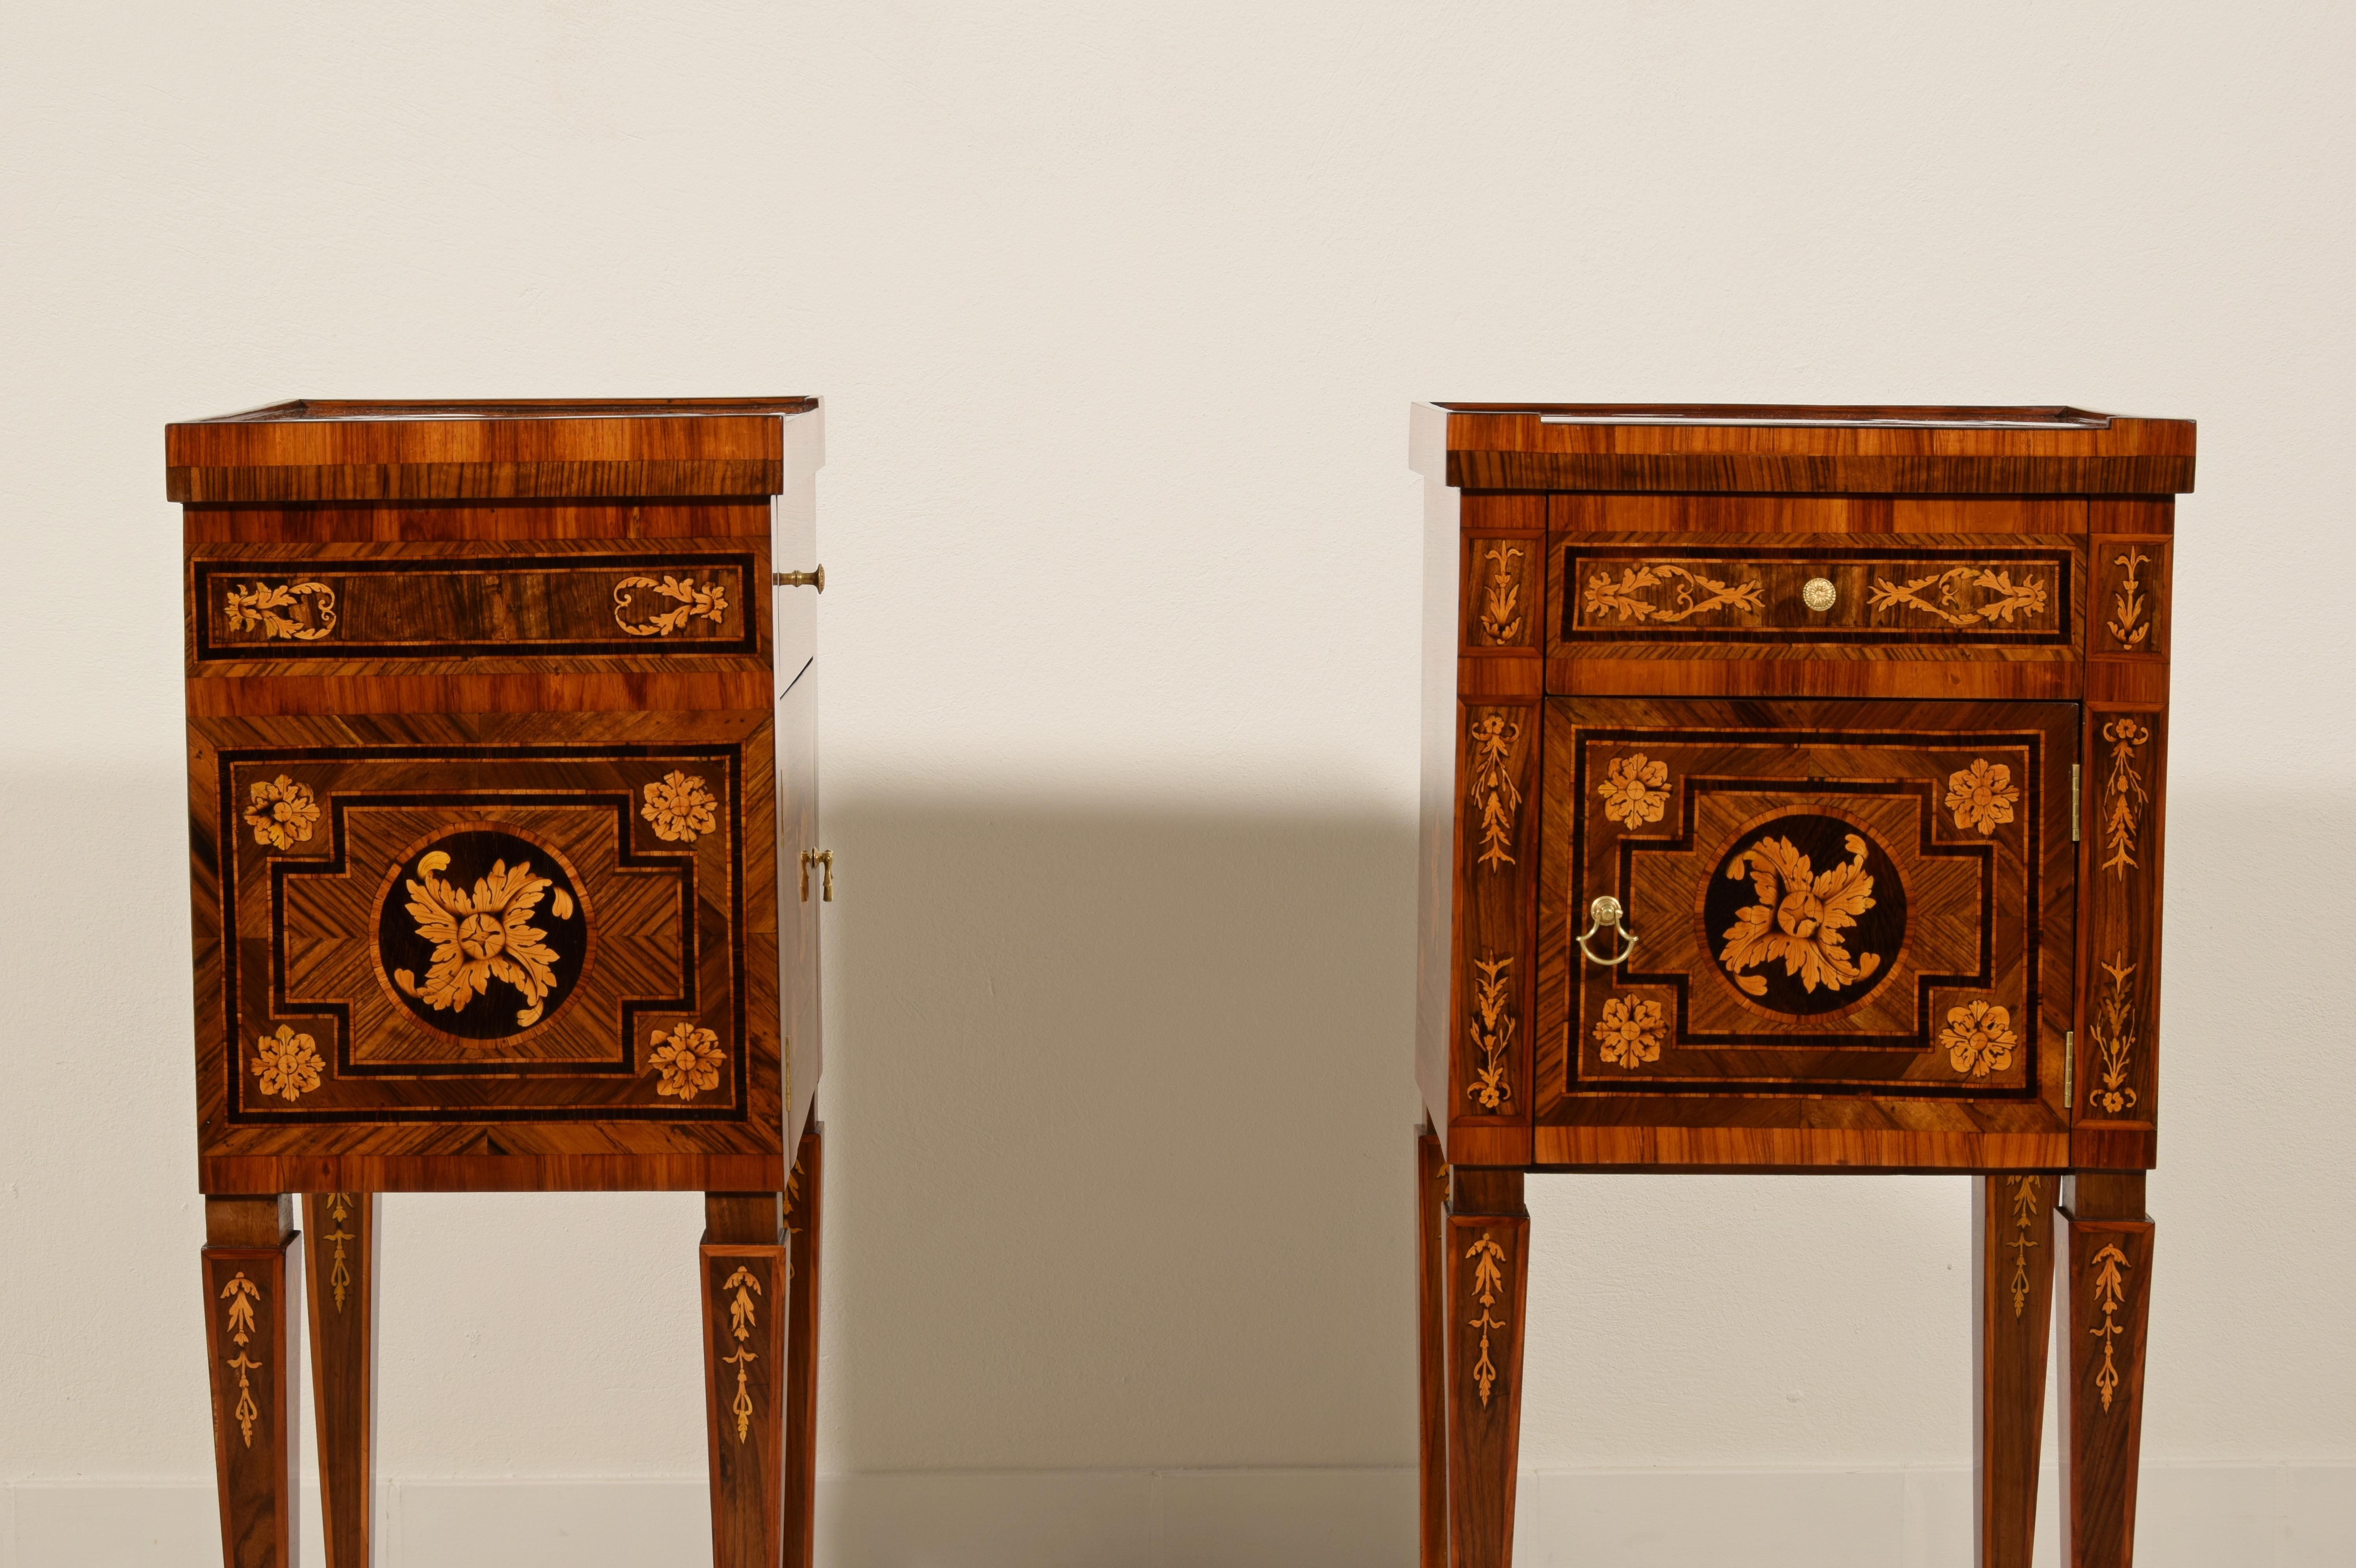 18th Century, Pair of Italian Neoclassical Inlaid Wood Bedside Tables 3